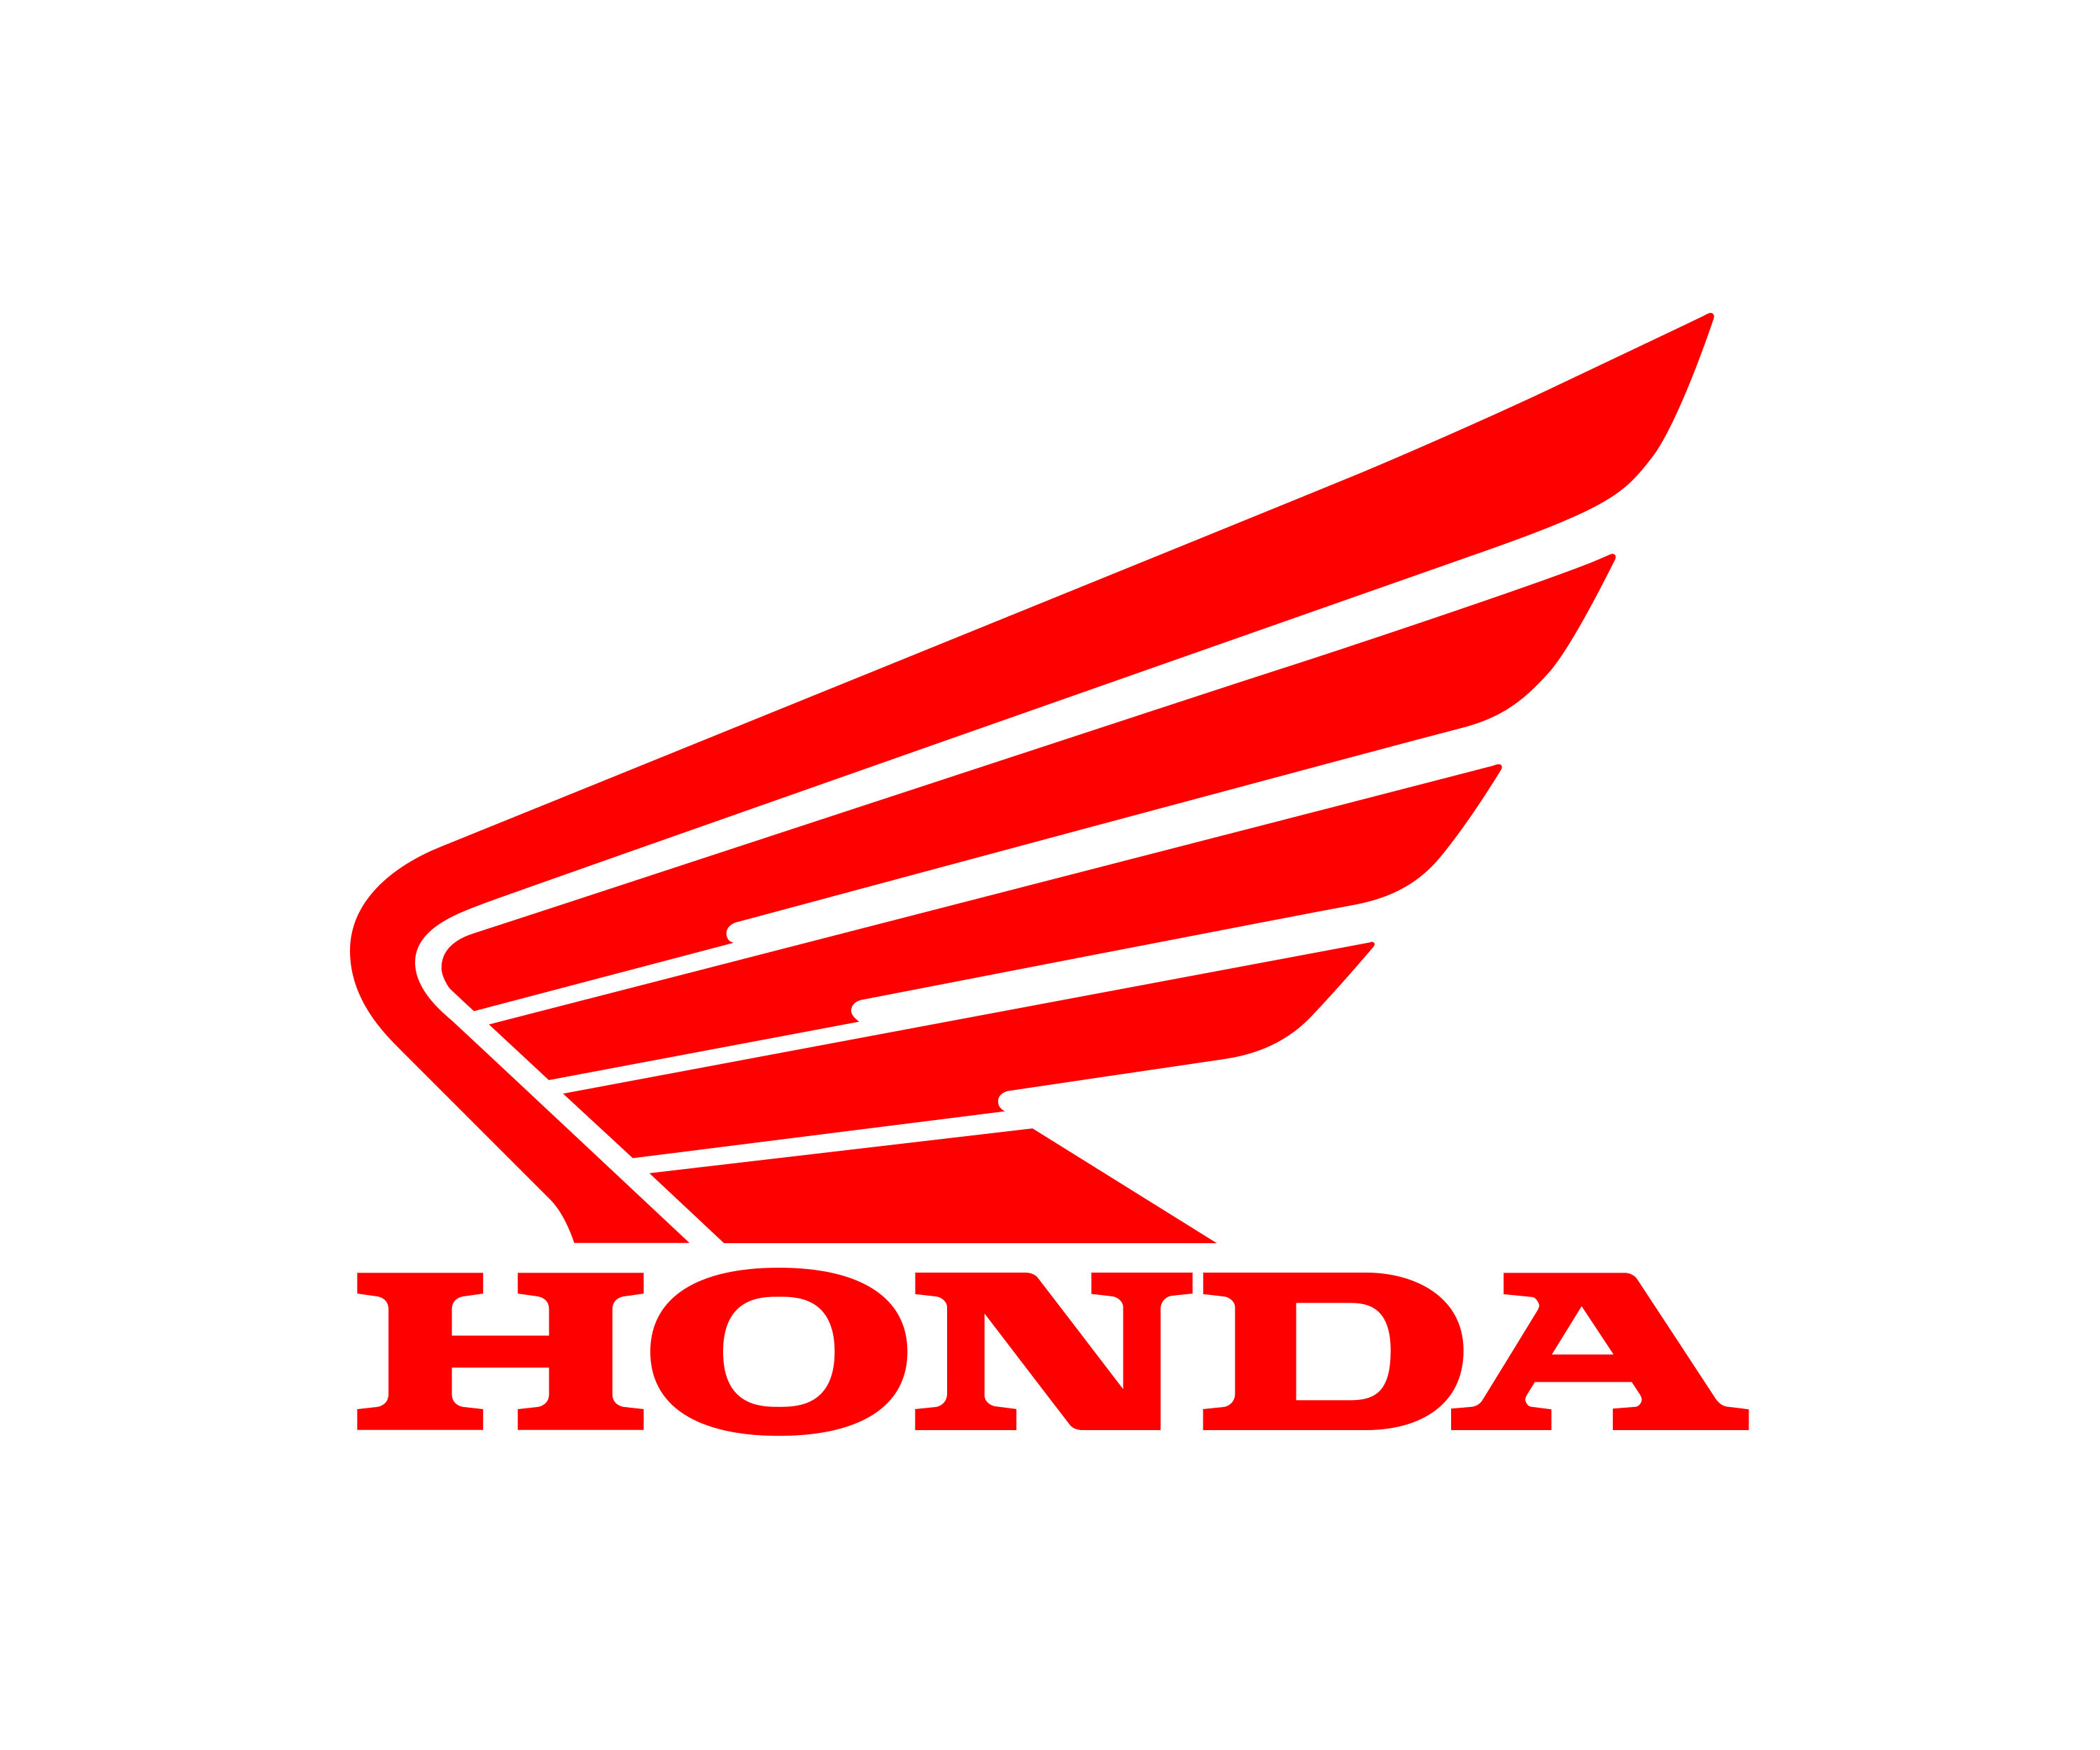 Japanese Bike Parts Company Logo - Most Popular Motorcycle Brands Logos with Names